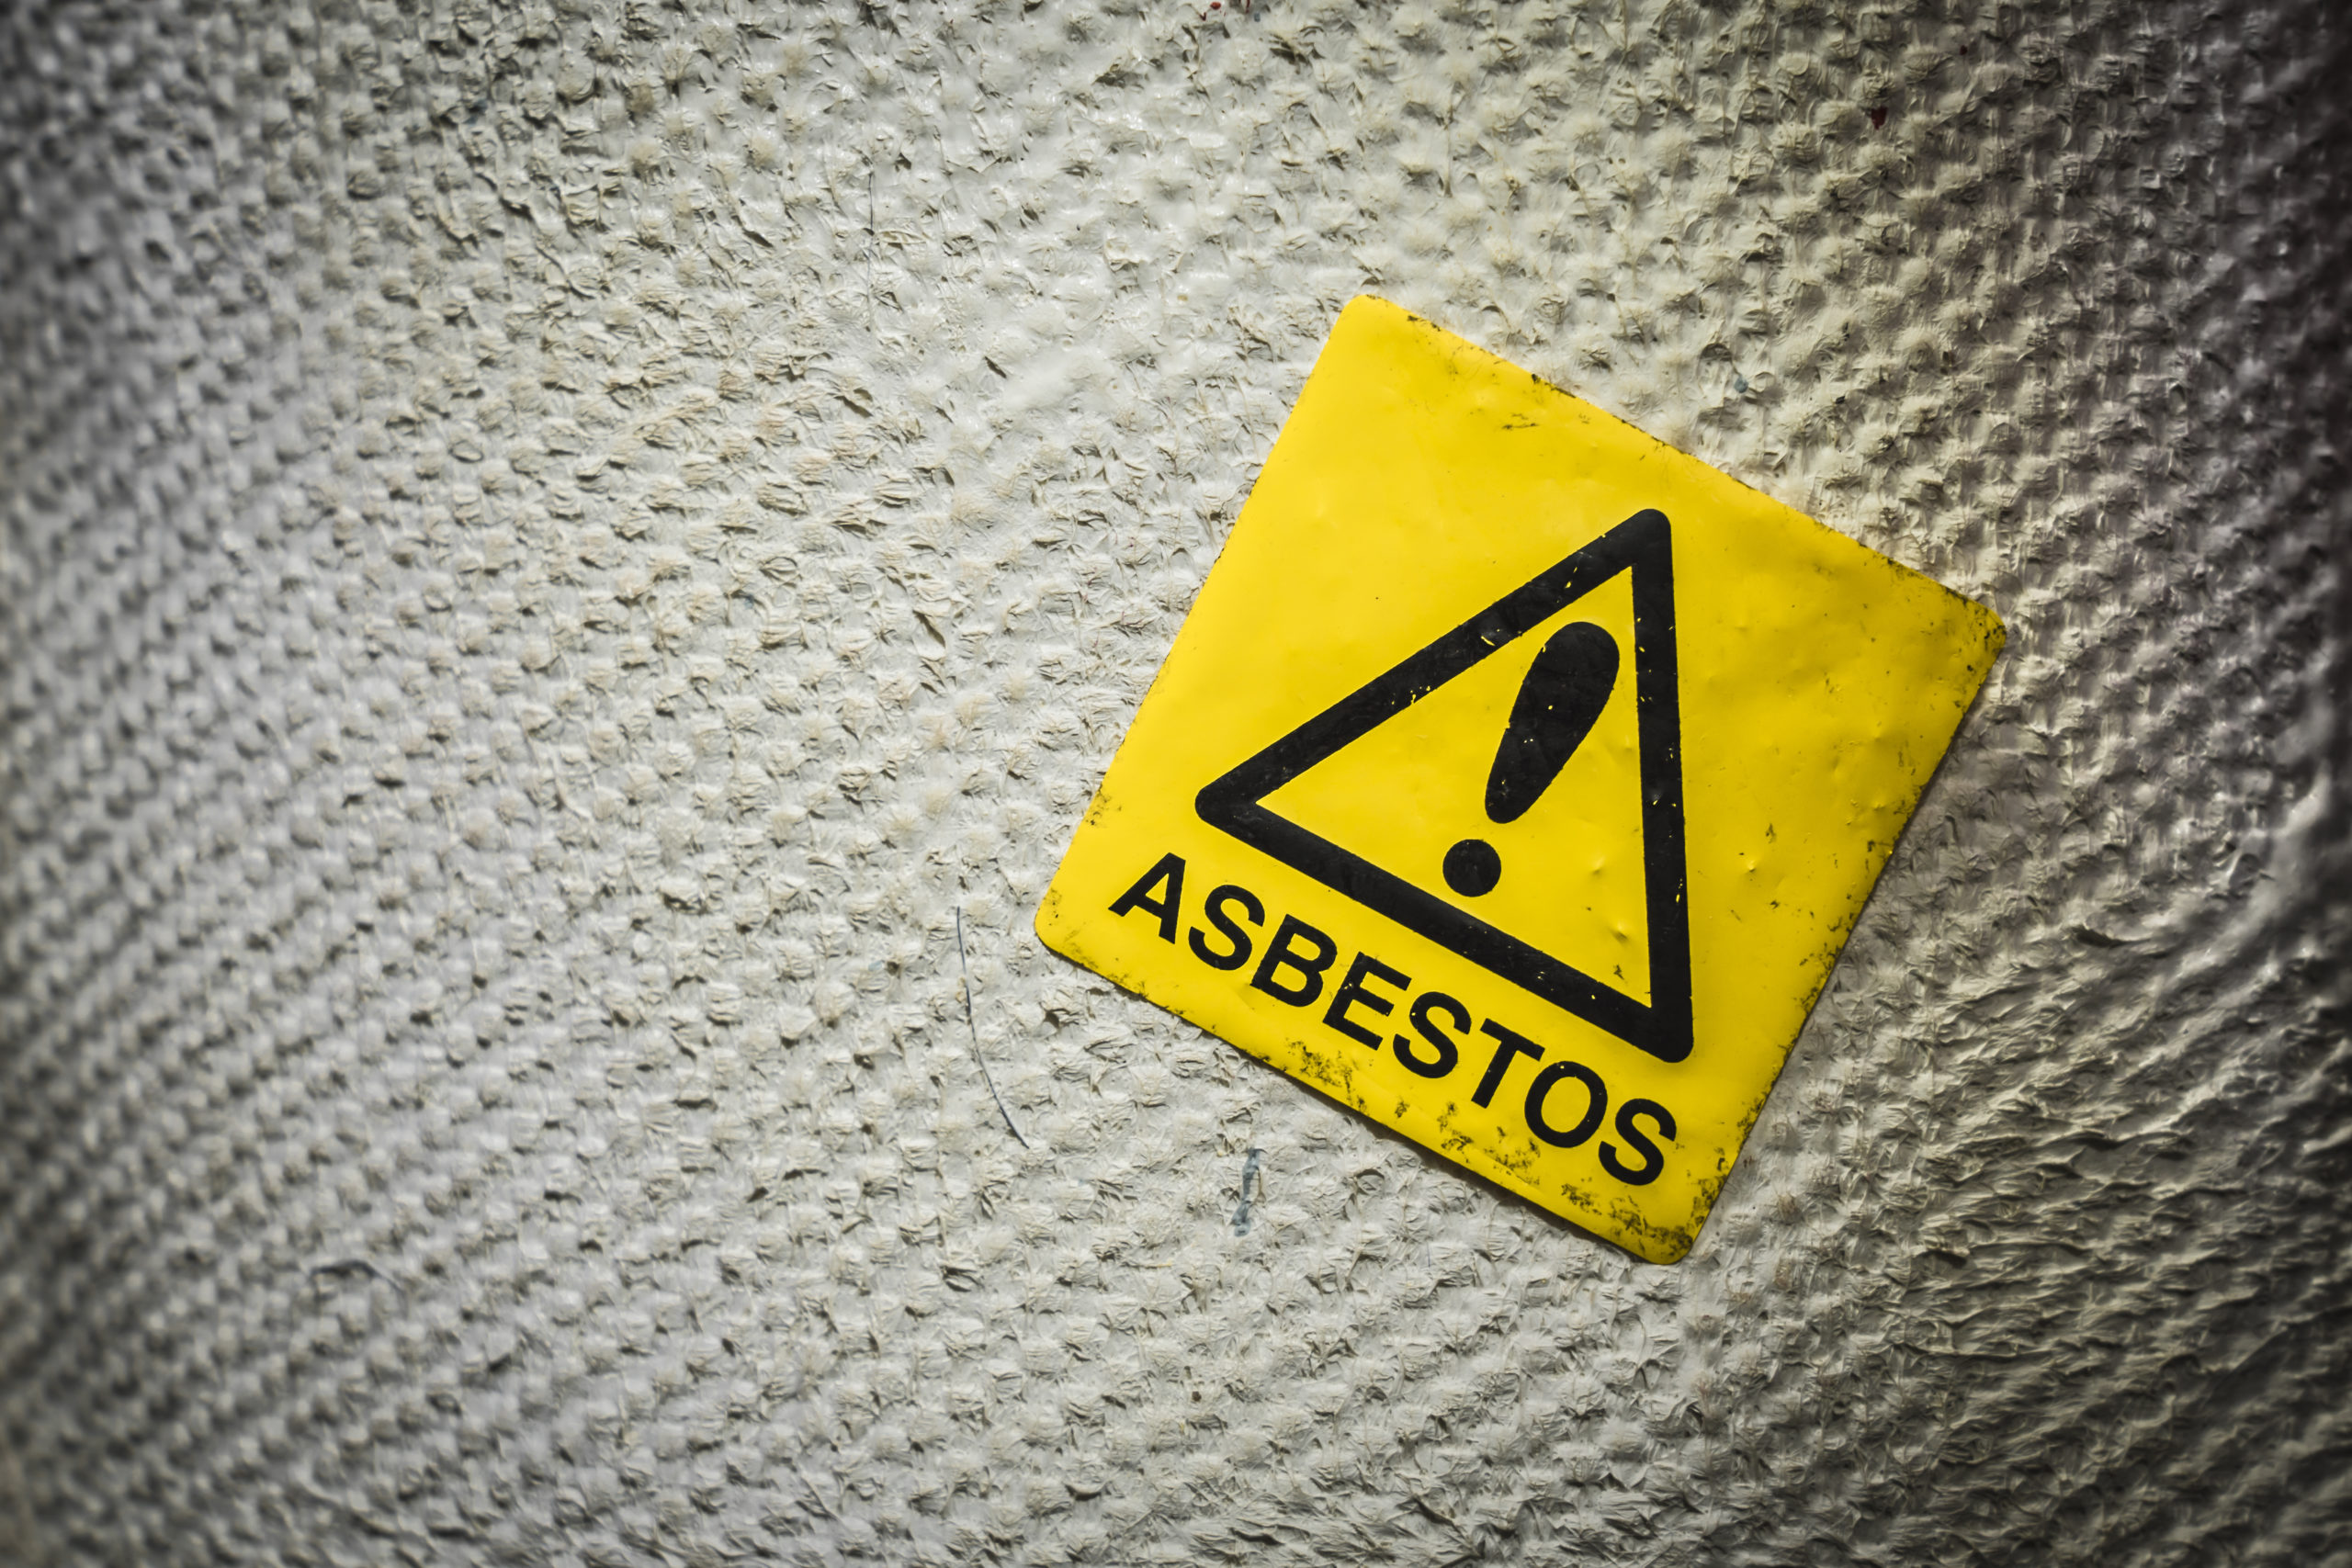 Welsh Campaigners Fighting Against Asbestos Found on Beach